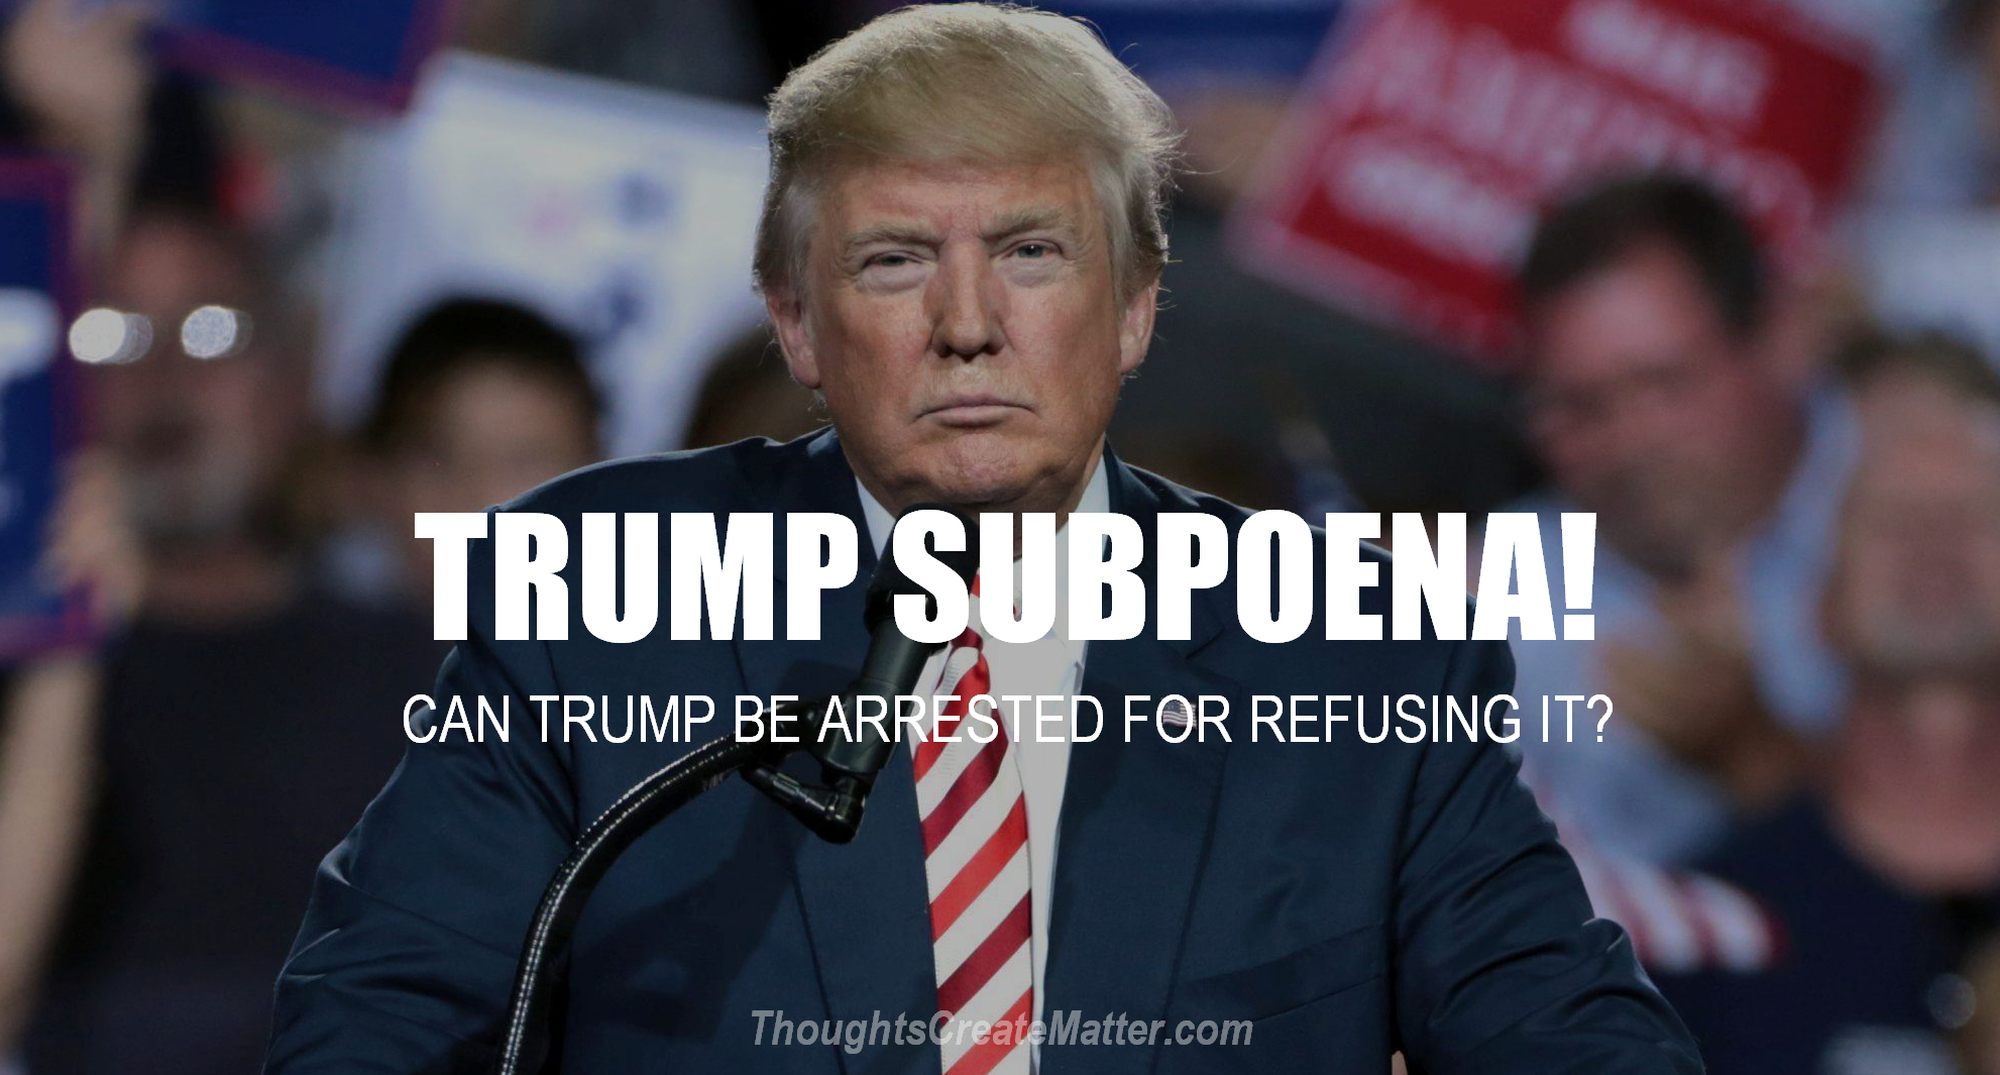 Trump glaring: Was Trump subpoenaed? Can he be arrested if he refuses to testify before the January 6th Committee?